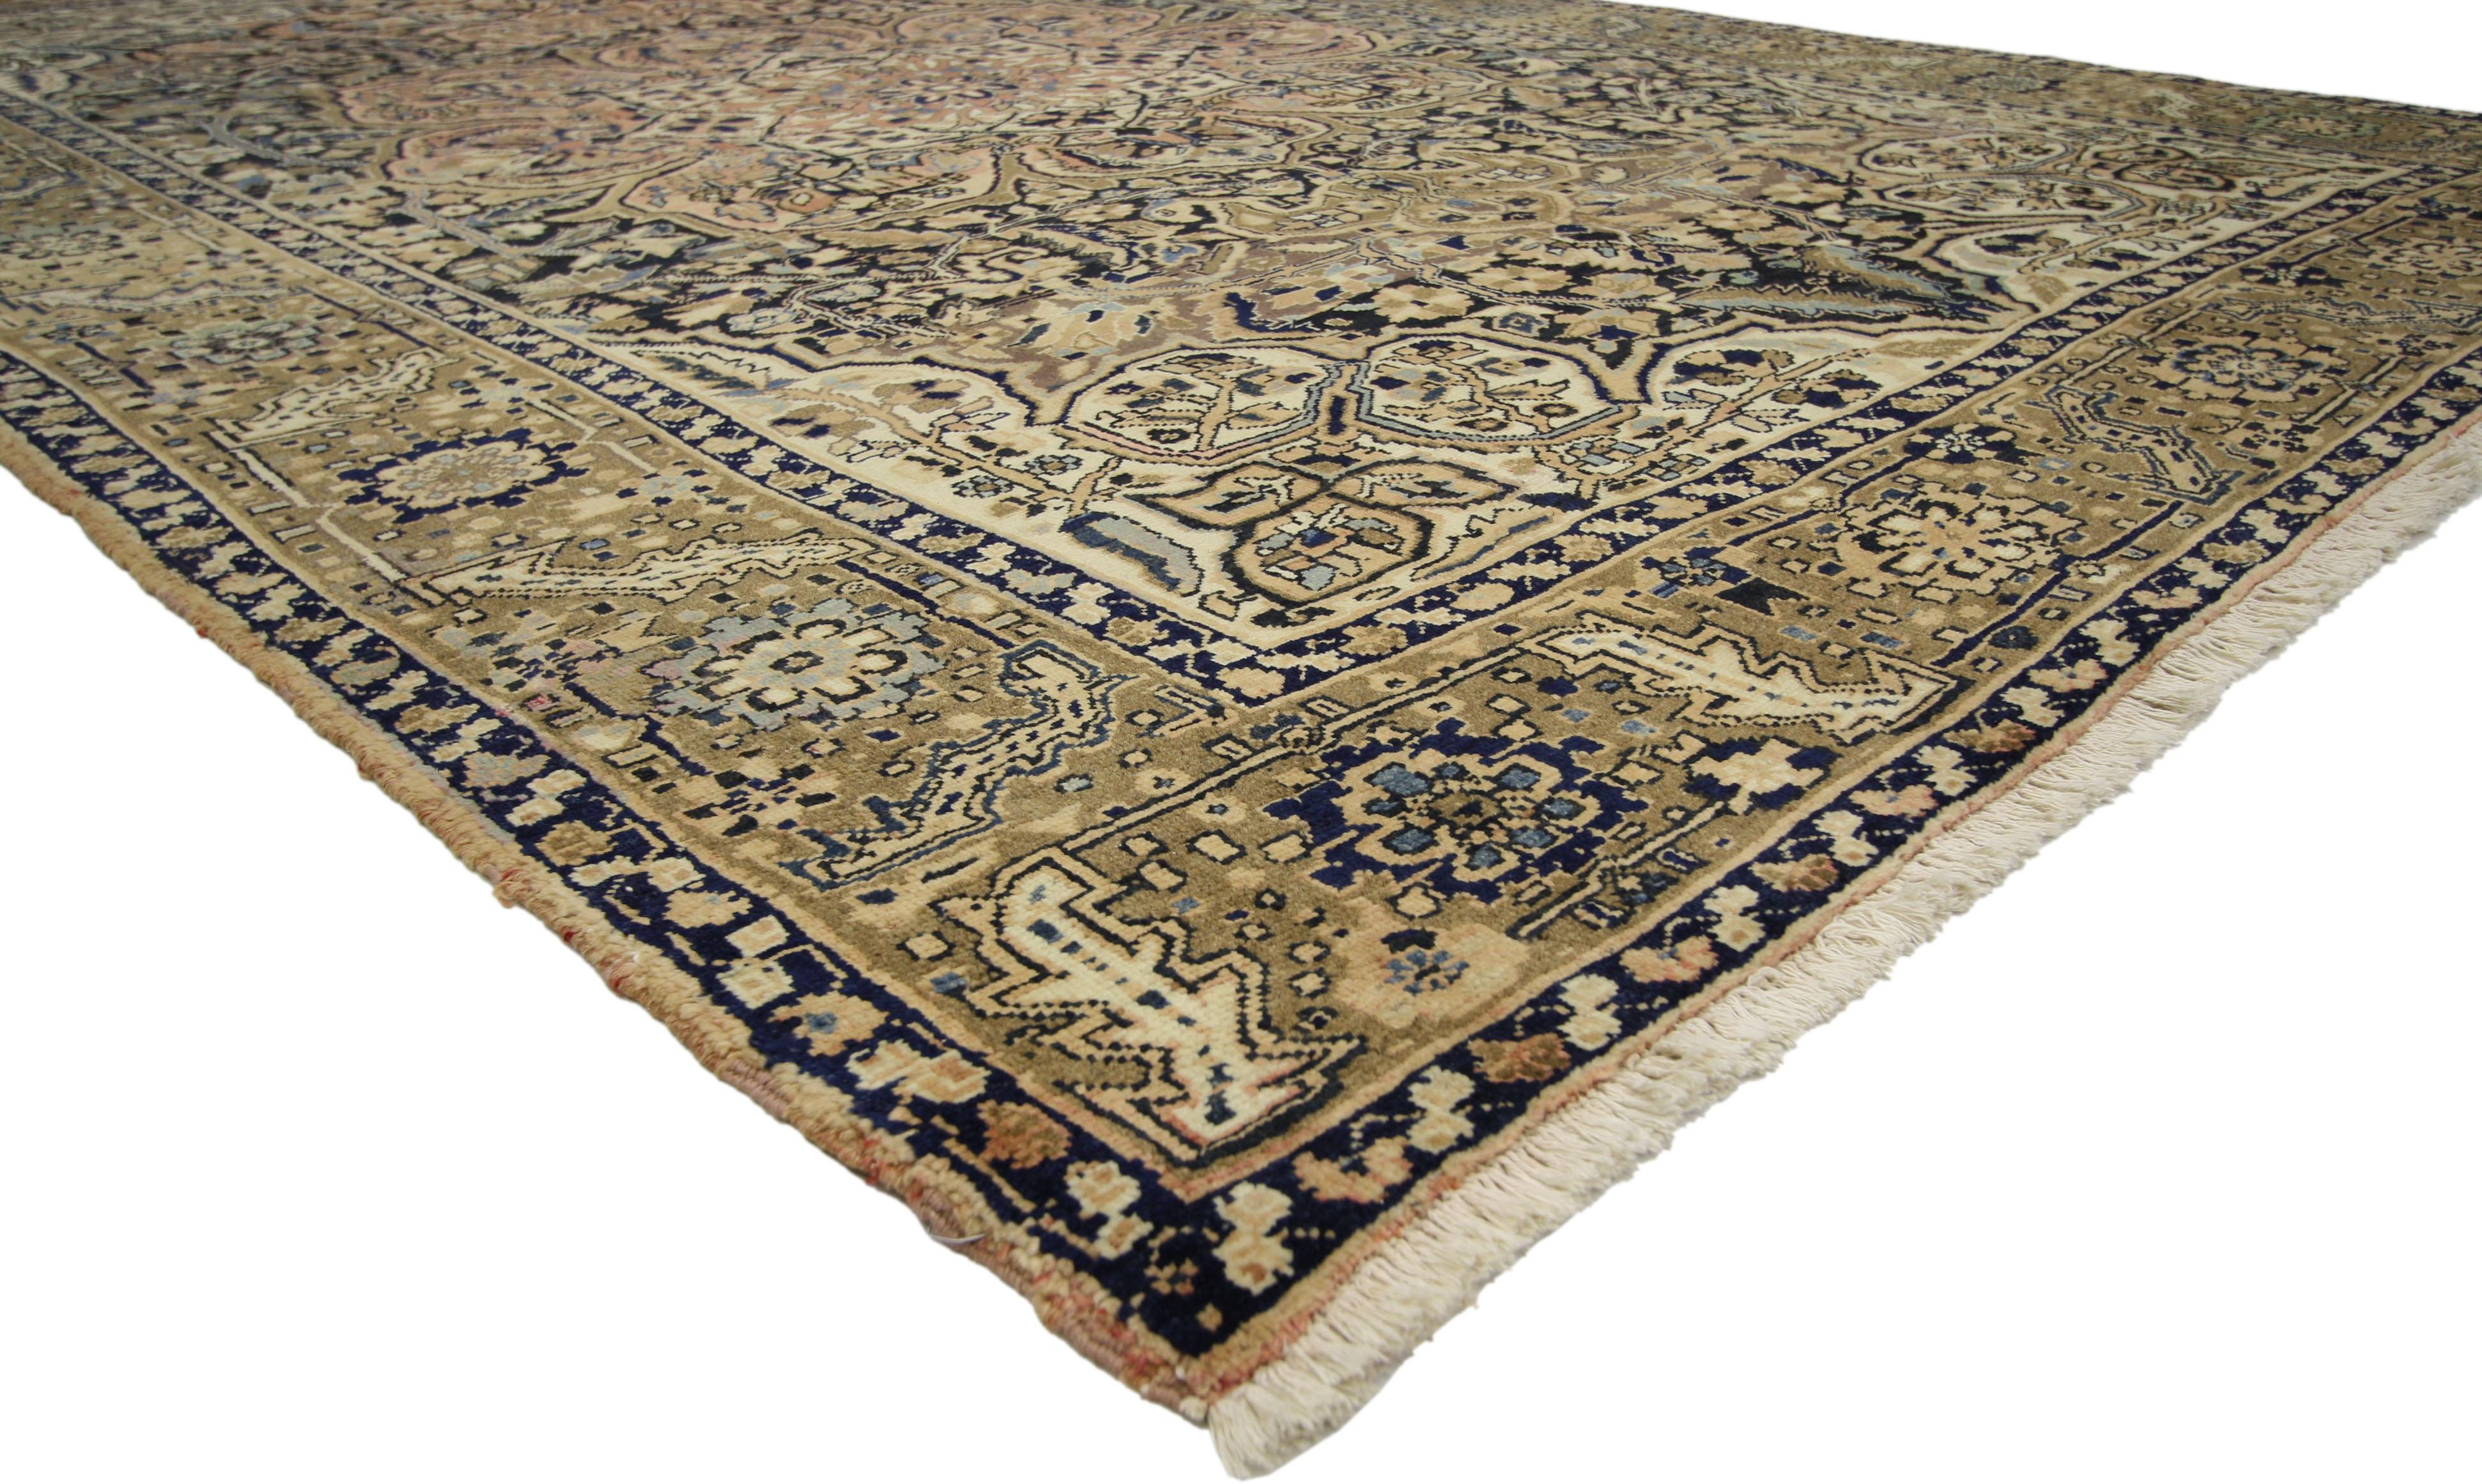 76316 Vintage Persian Heriz Area rug with Arts & Crafts Artisan style. This hand knotted wool vintage Persian Heriz rug features an concentric octofoil medallion with serrated palmette anchor pendants. The octagram medallion is surrounded by an